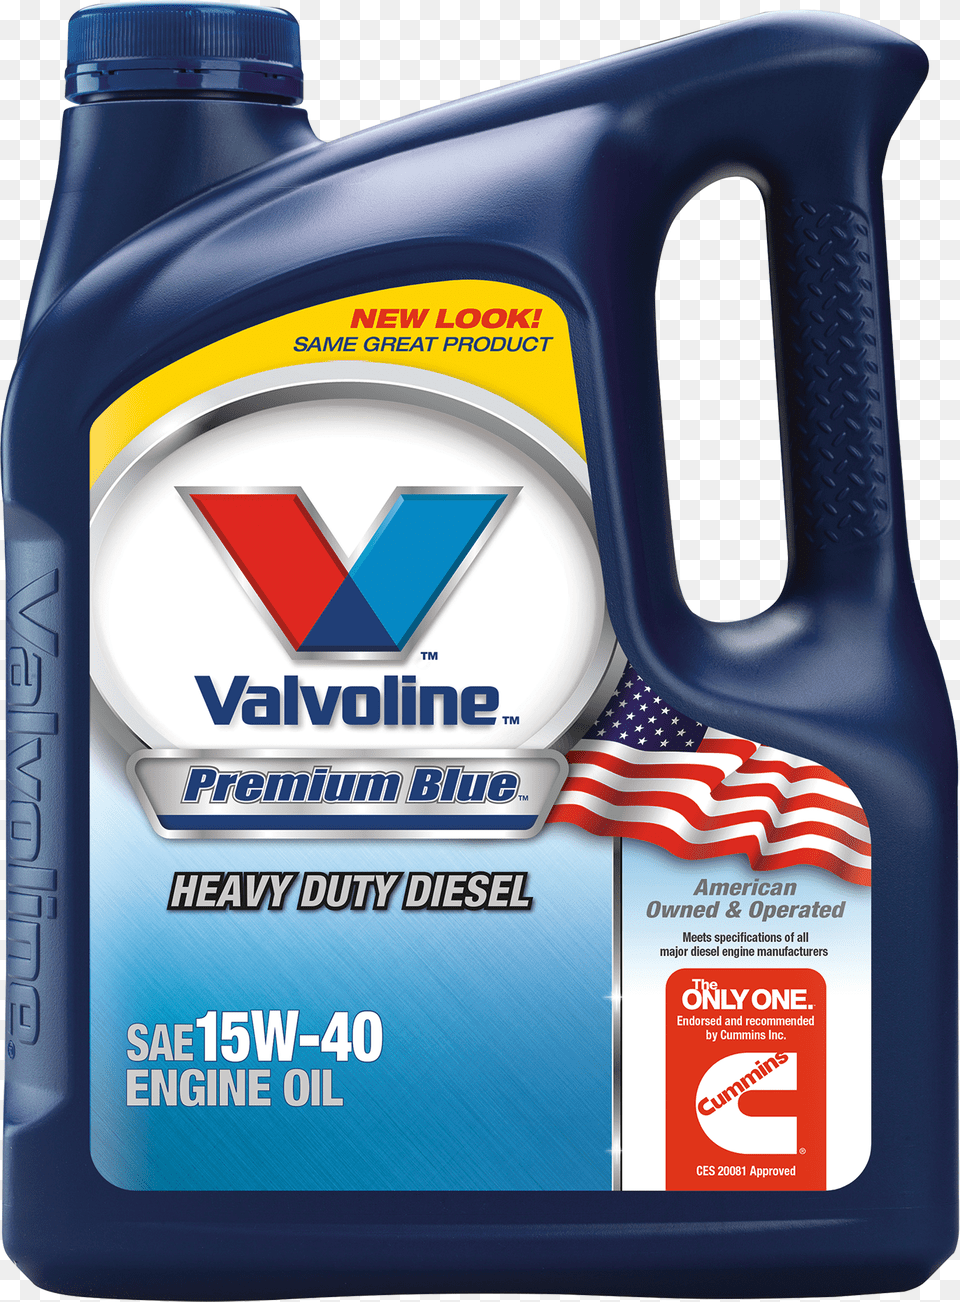 Oil Container Image Valvoline Premium Blue, Can, Cleaning, Person, Tin Png